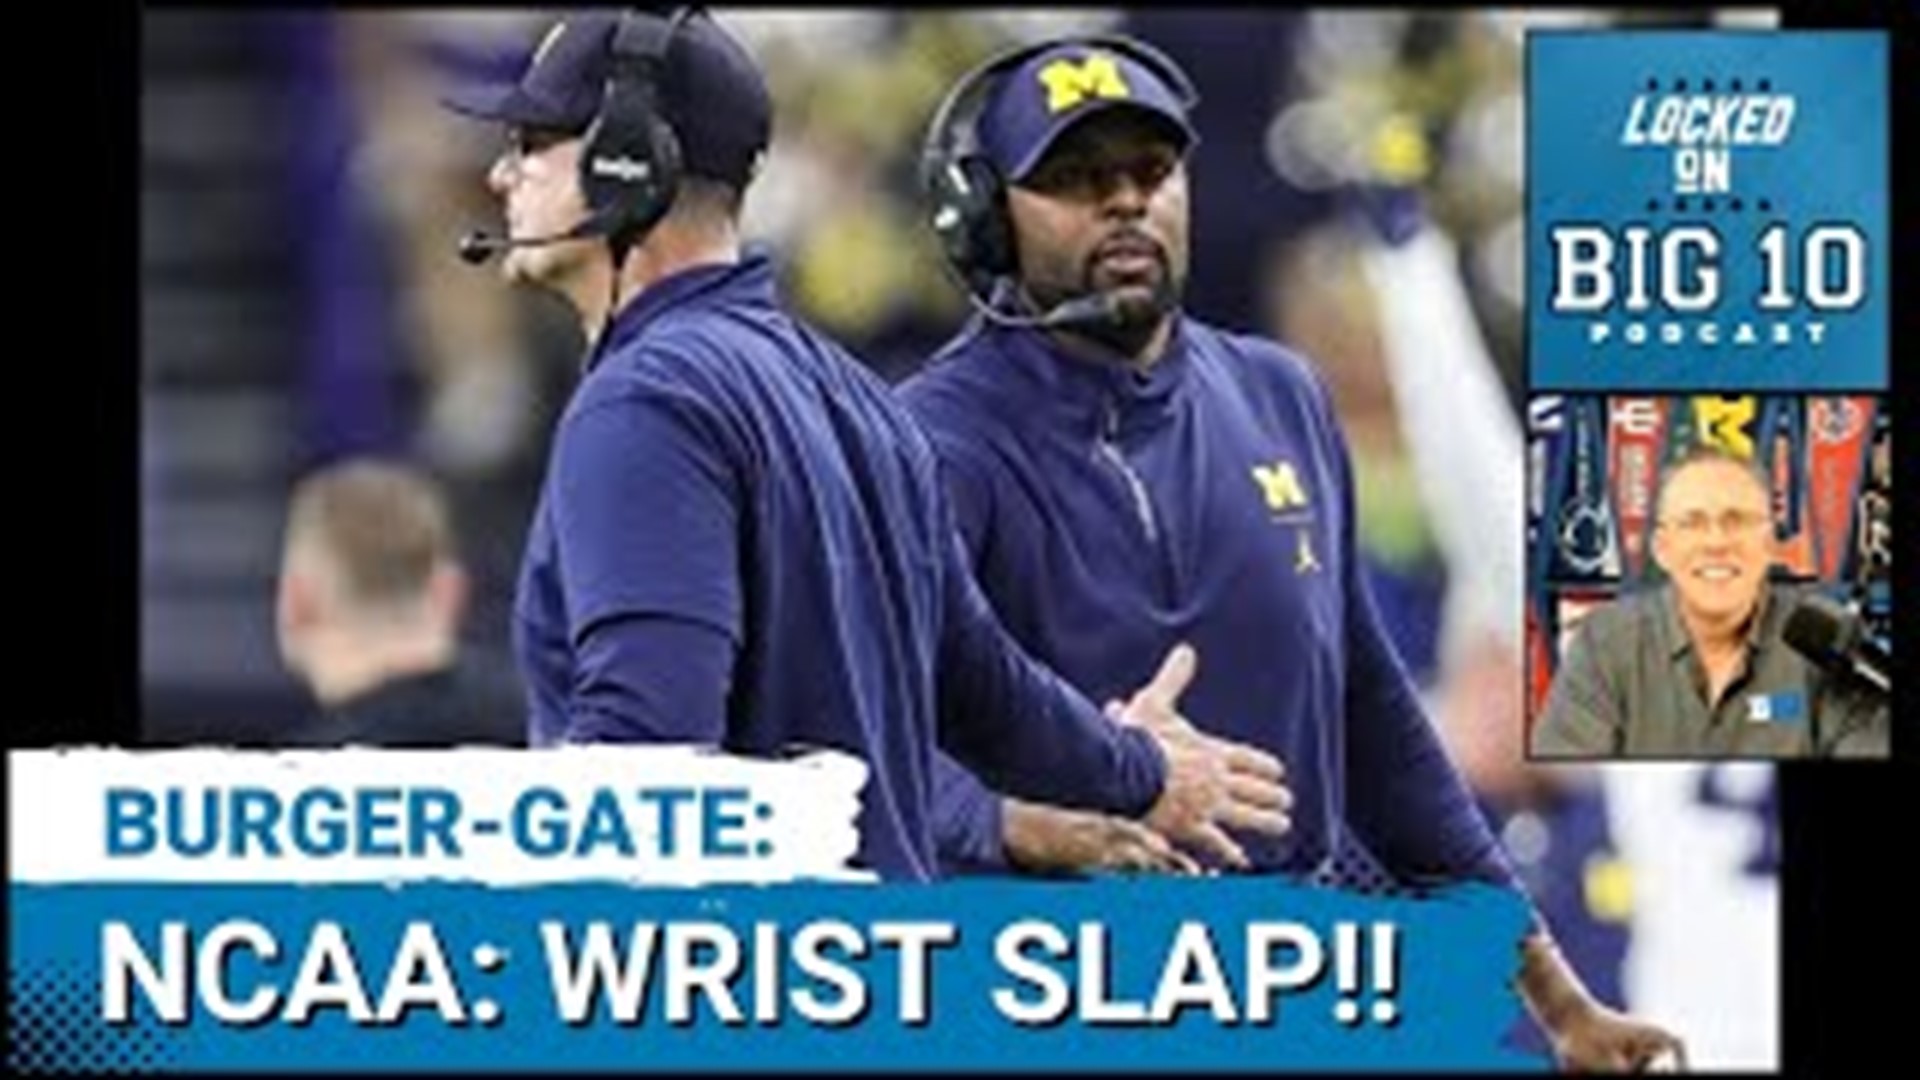 The NCAA sanctioned Michigan Football for its involvement in Burger-Gate when former head coach Jim Harbaugh met with recruits during an NCAA non-visit period.